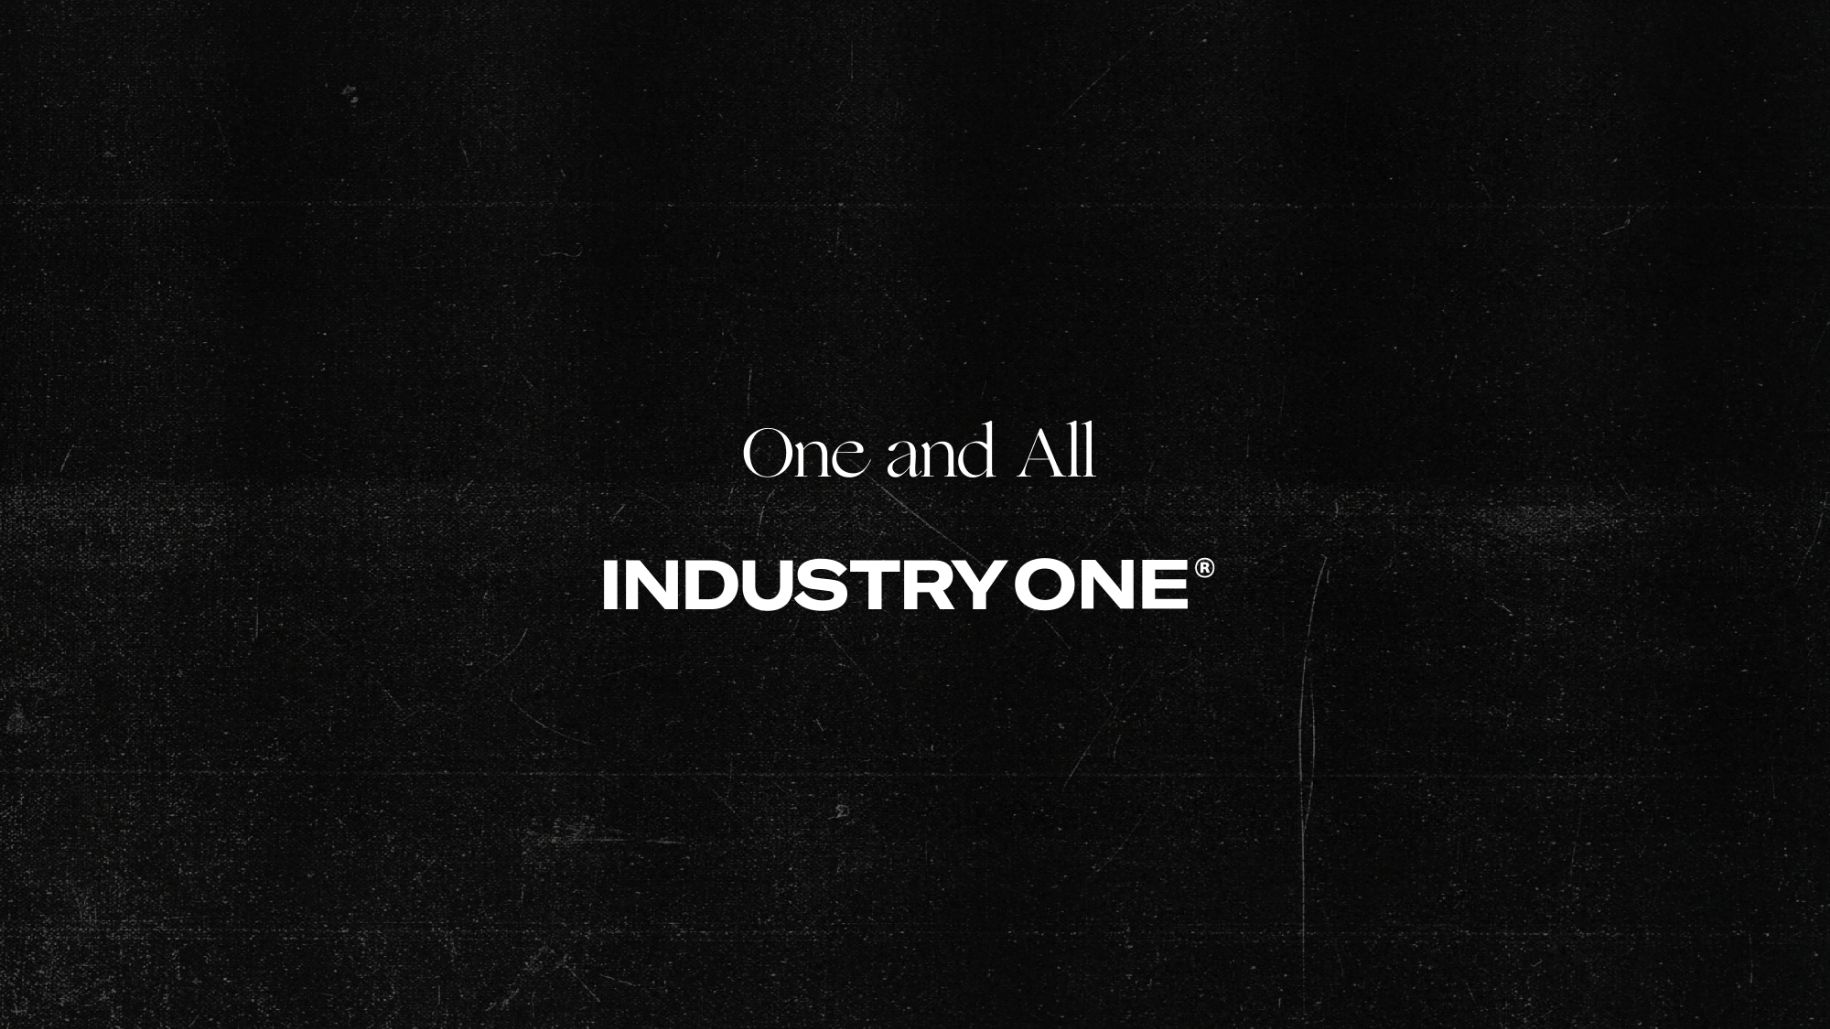 One and All. INDUSTRY ONE